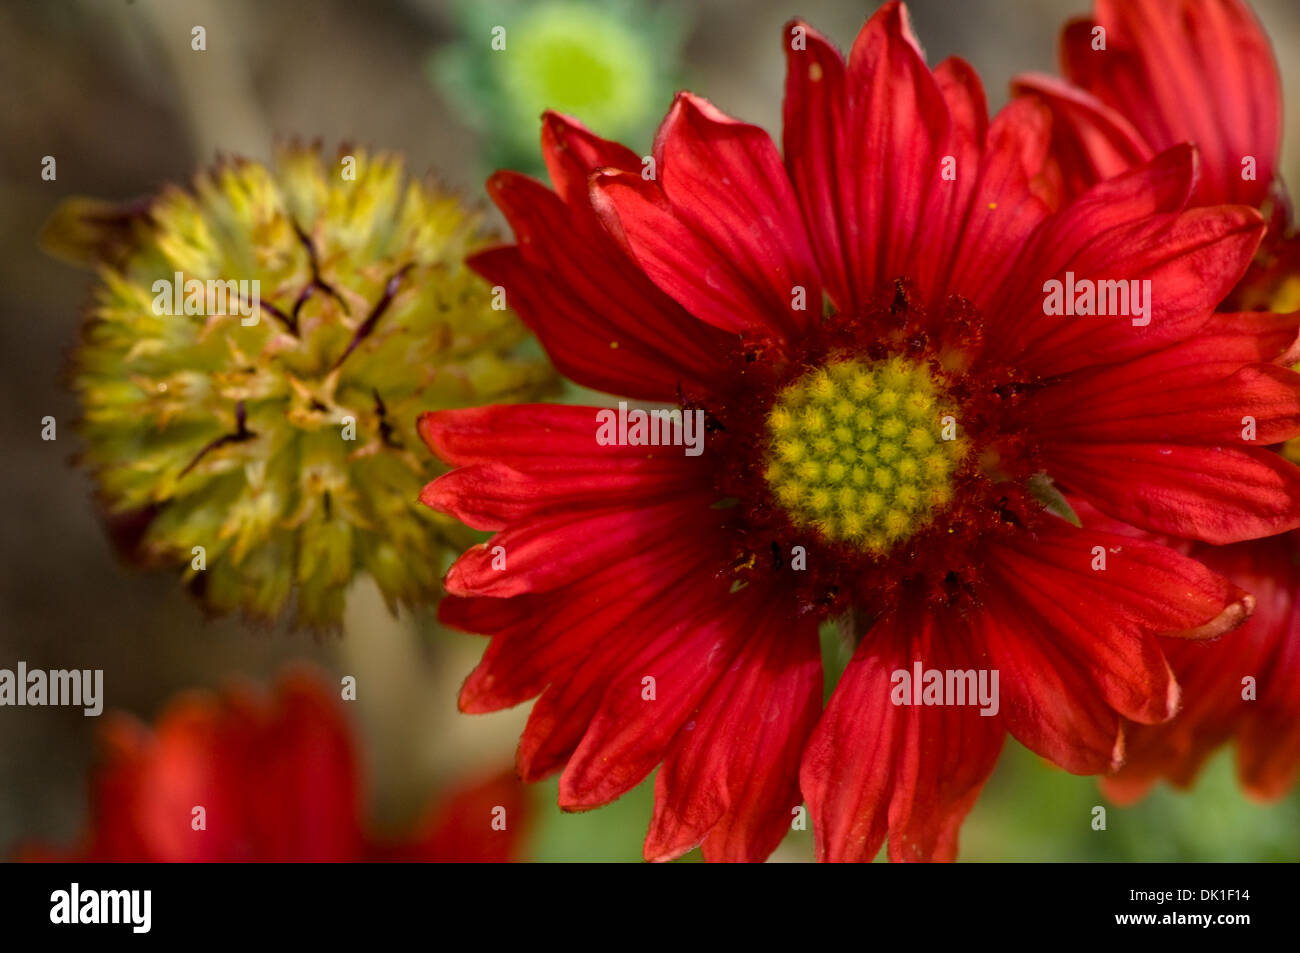 Single, red, Gaillardia flower, close-up. with a budding flower in the background. Stock Photo